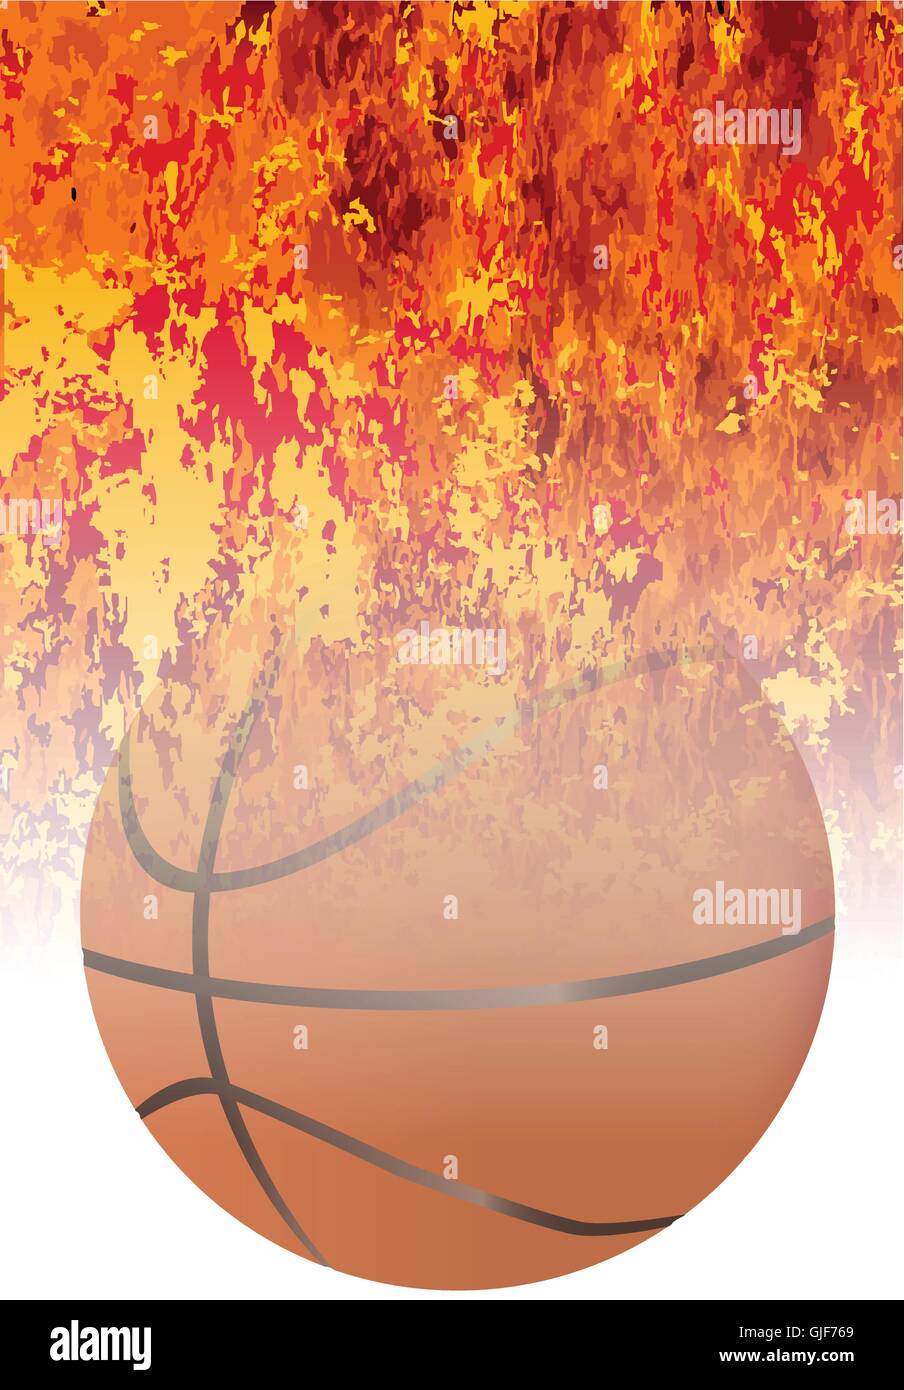 A roaring flames image background with faded basketball Stock Vector